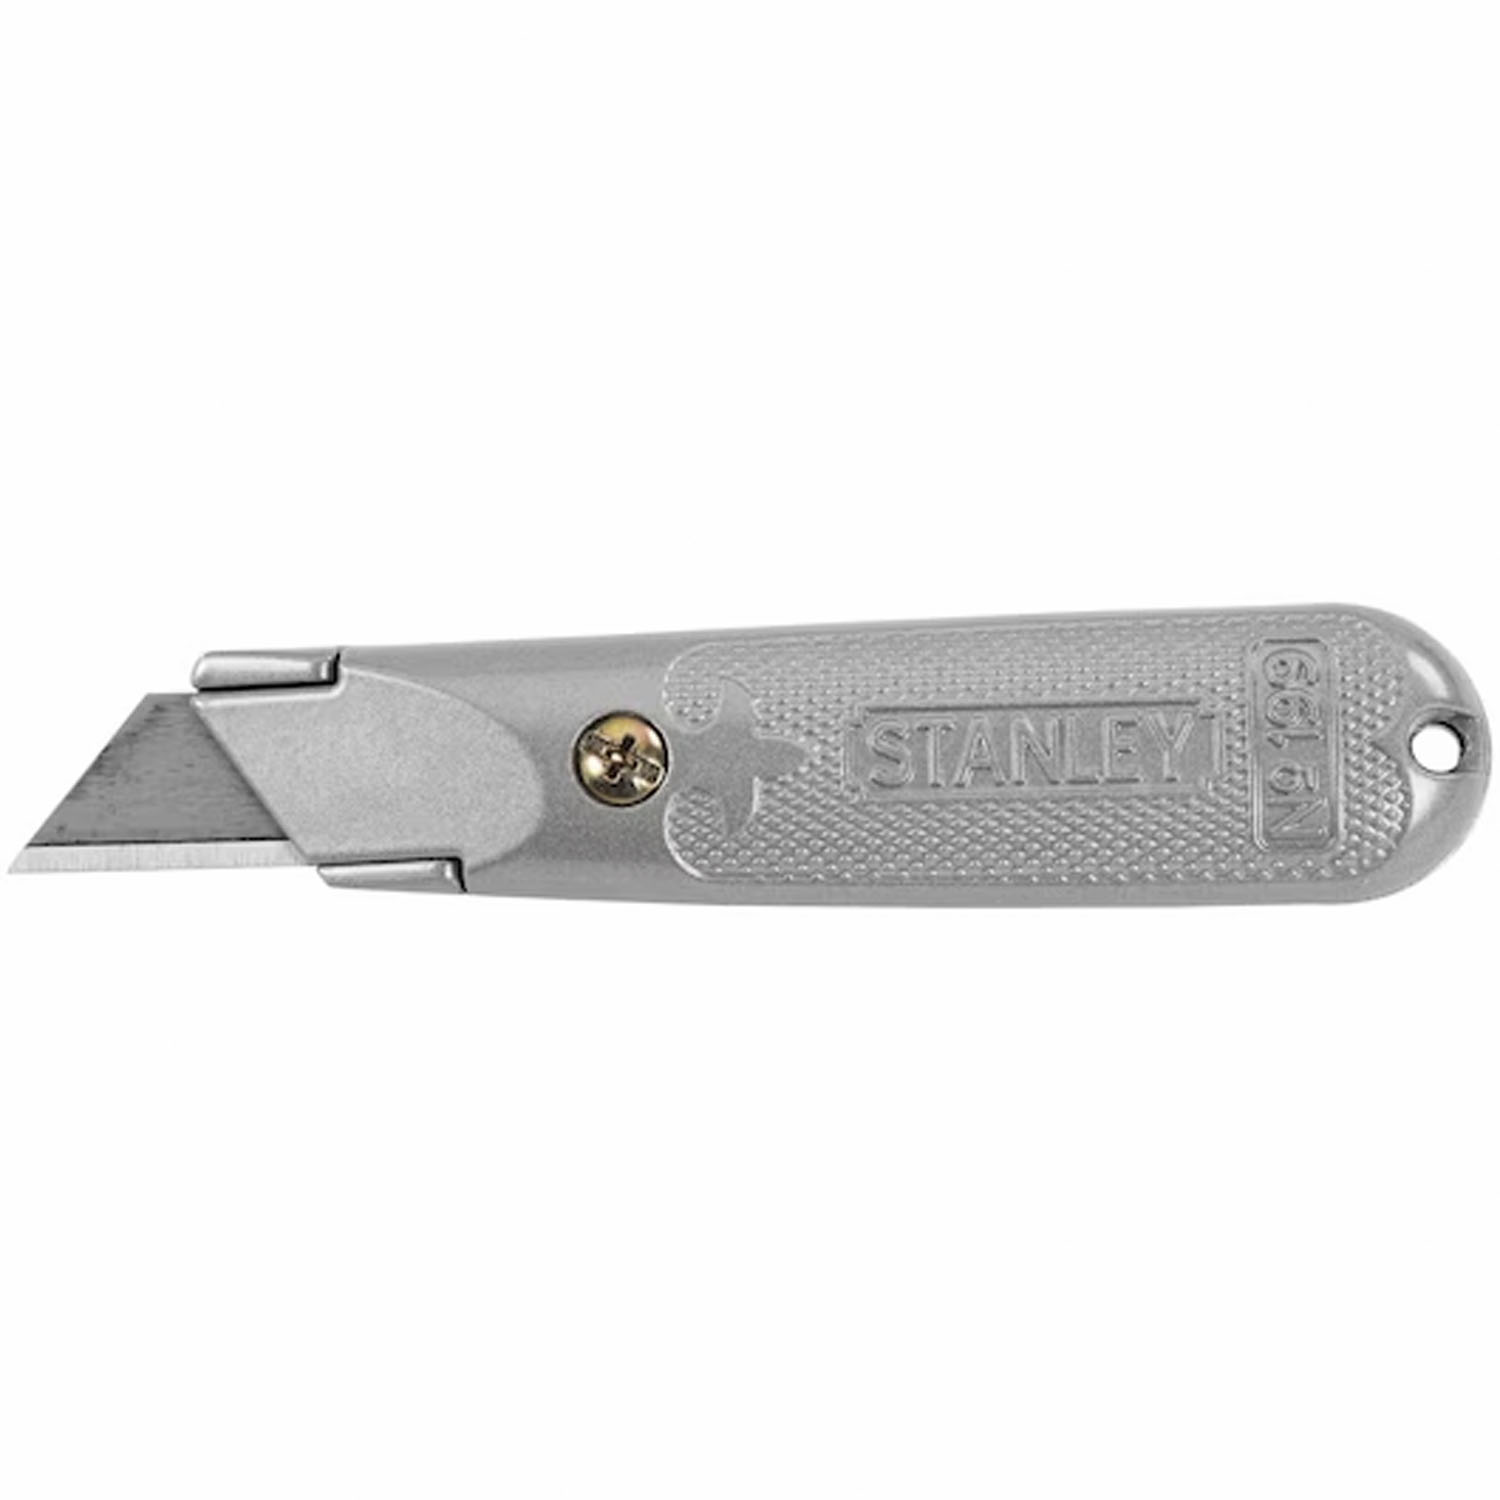 5-3/8 IN. CLASSIC 199 FIXED BLADE UTILITY KNIFE